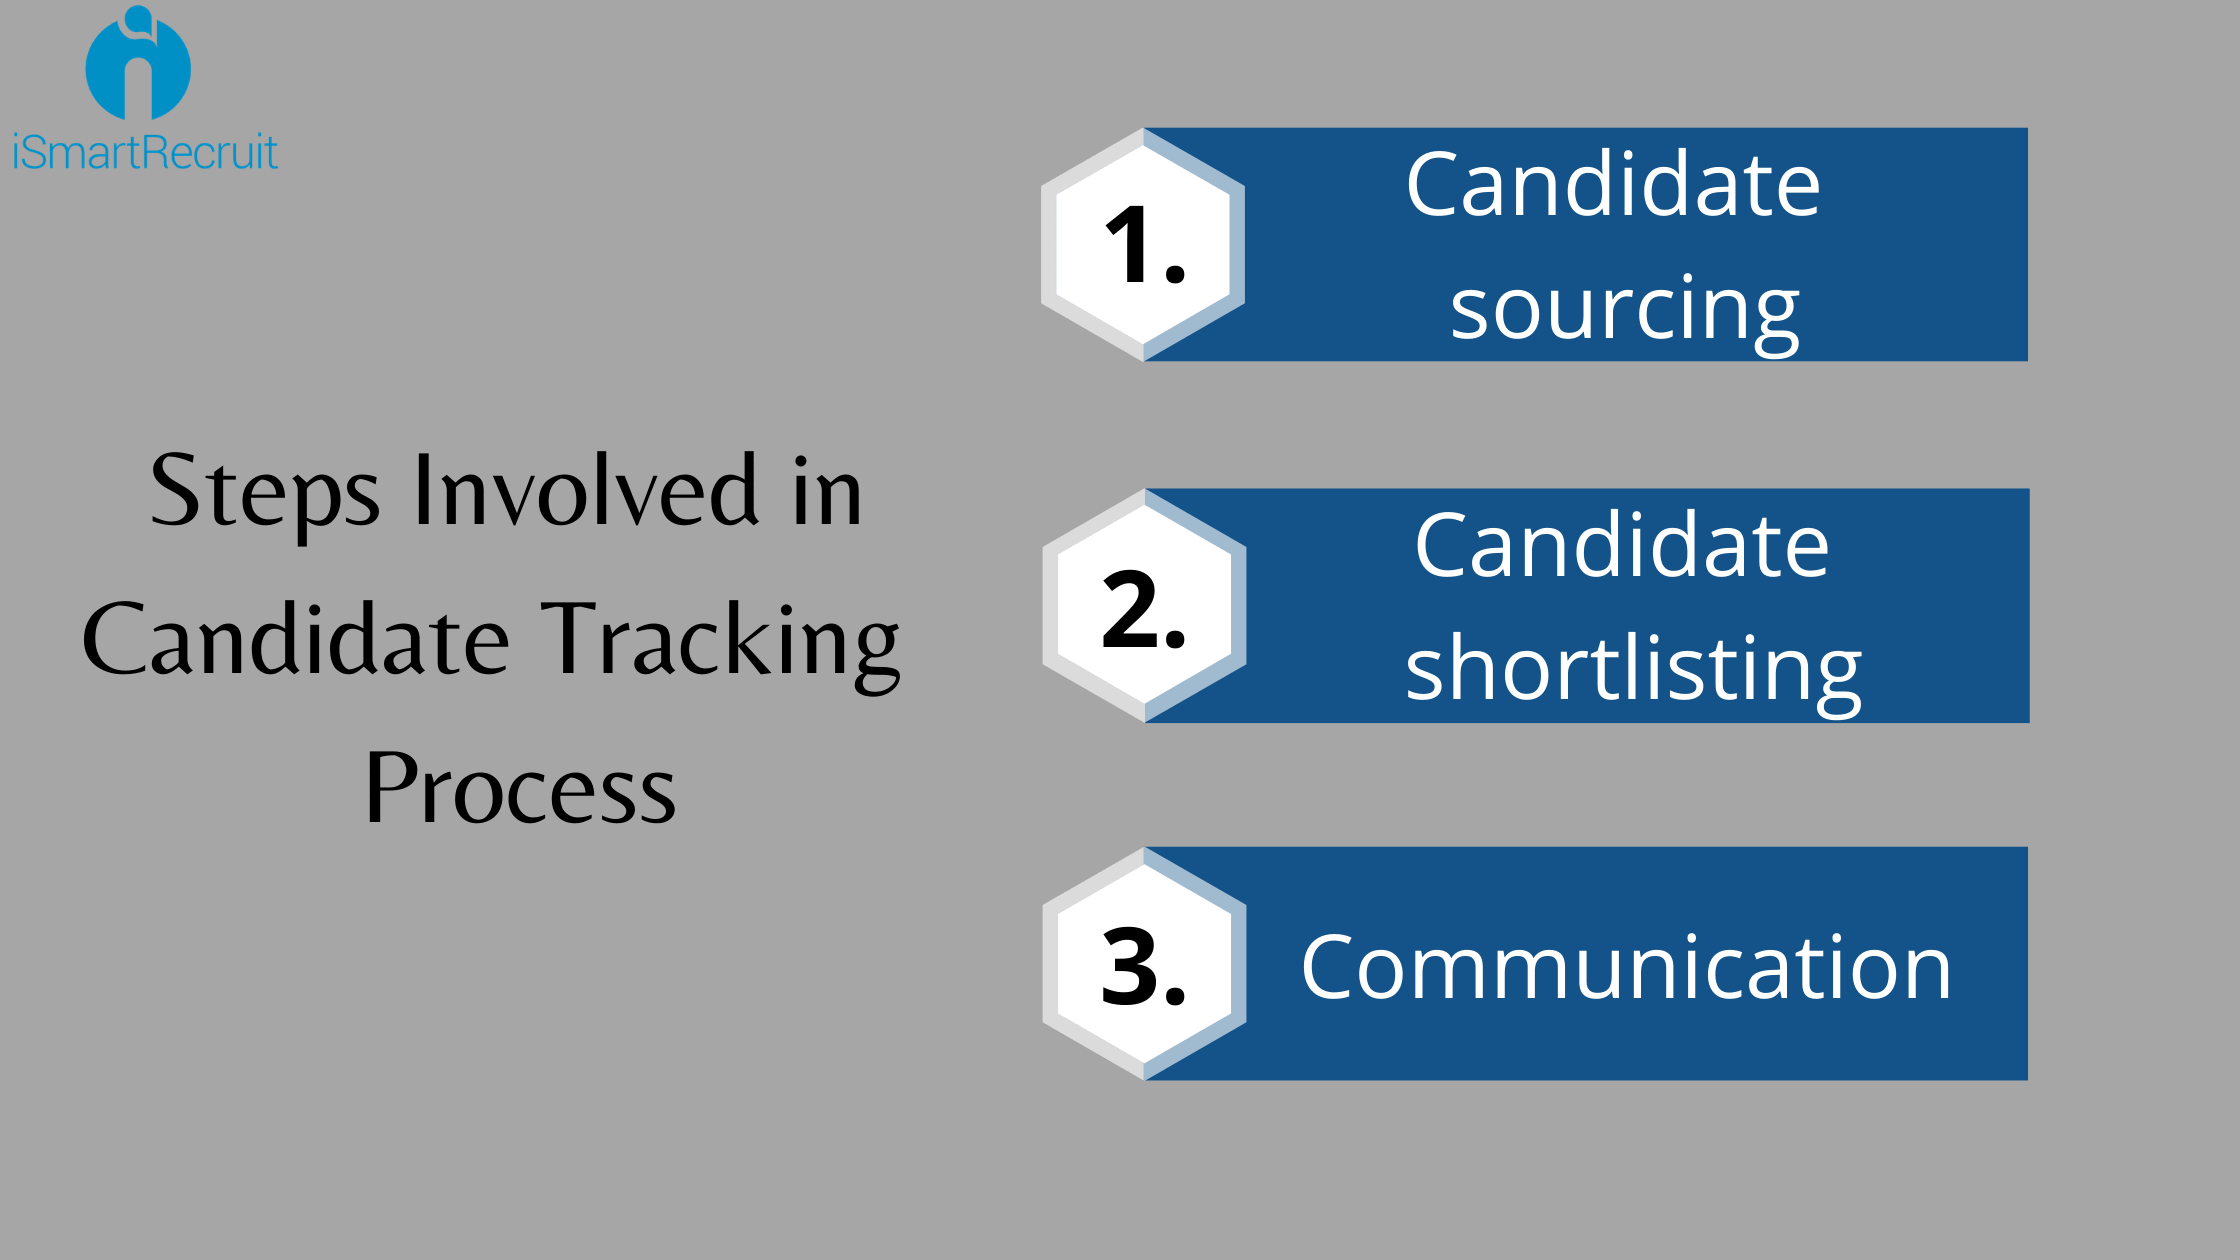 Steps Involved in Candidate Tracking Process